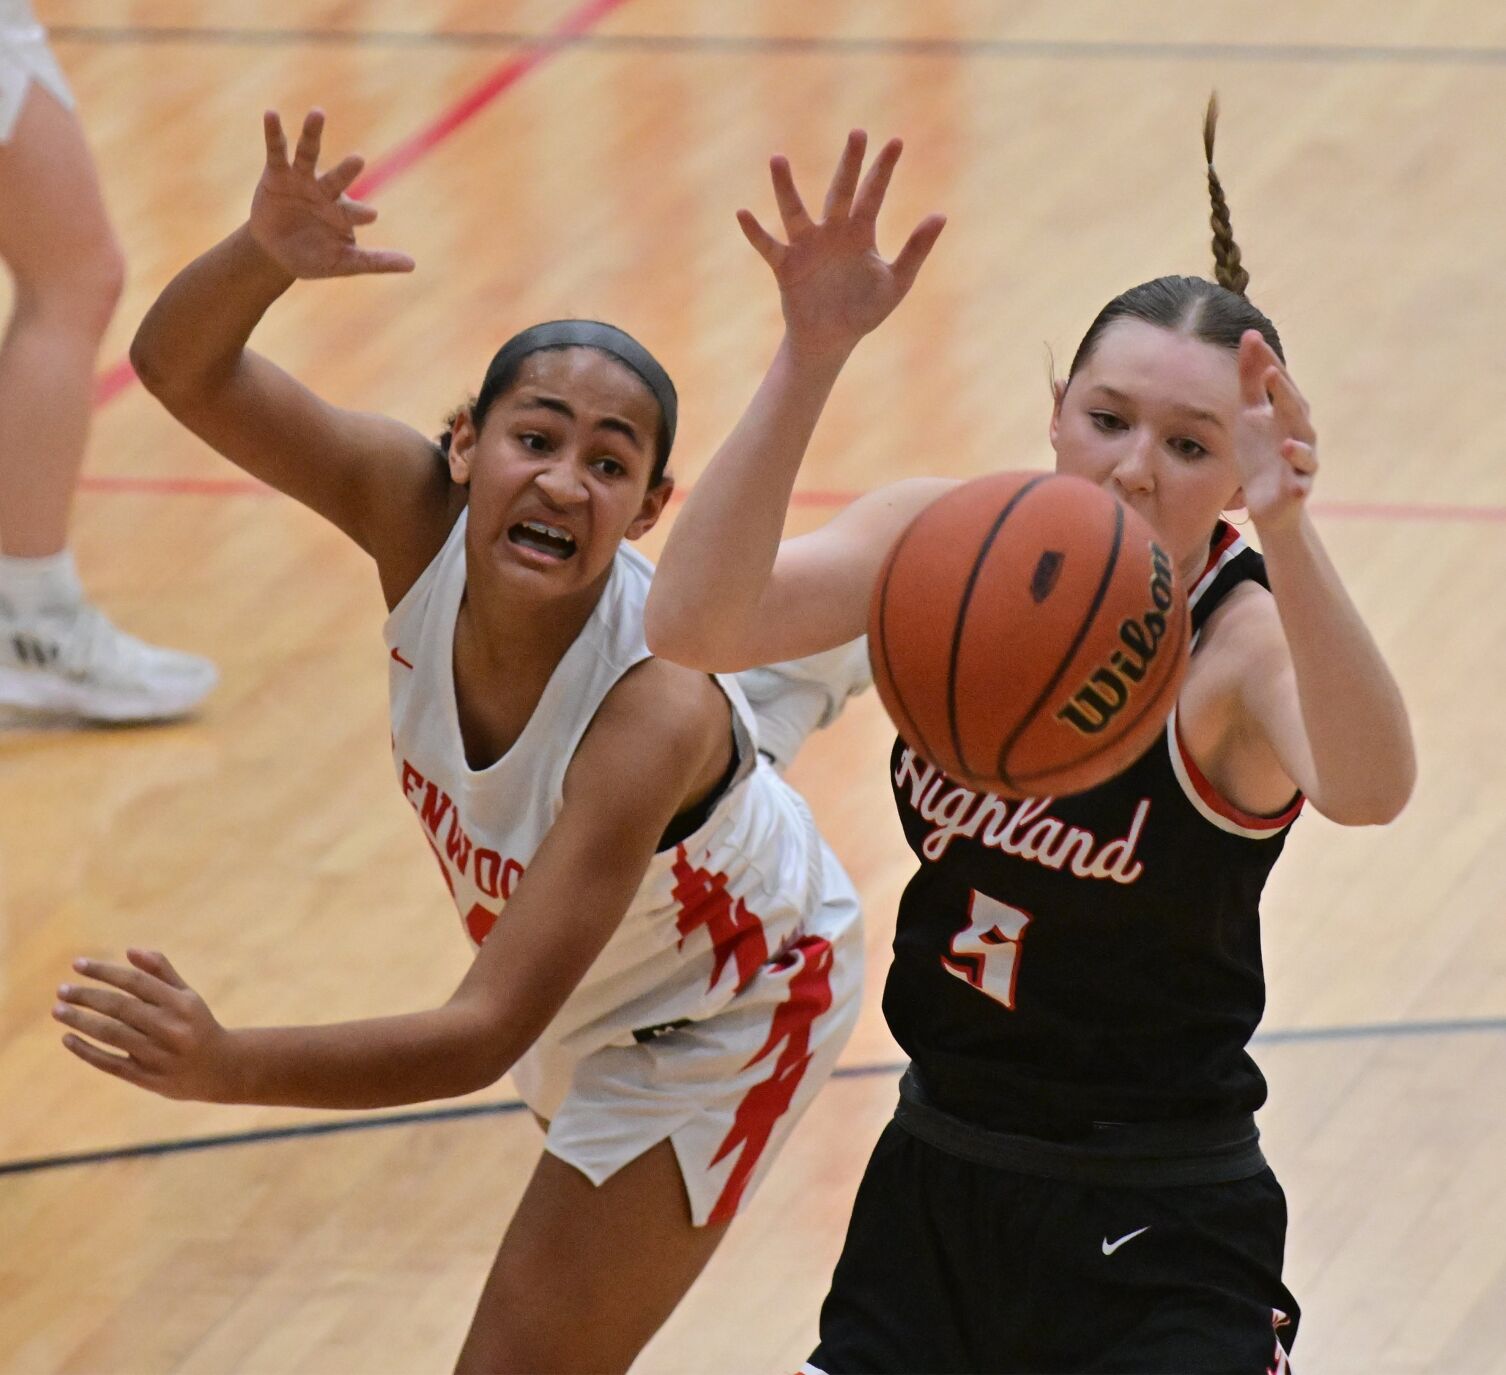 Chatham Glenwood Advances to State Semifinal after Defeating Highland in 3A Girls Super-Sectional